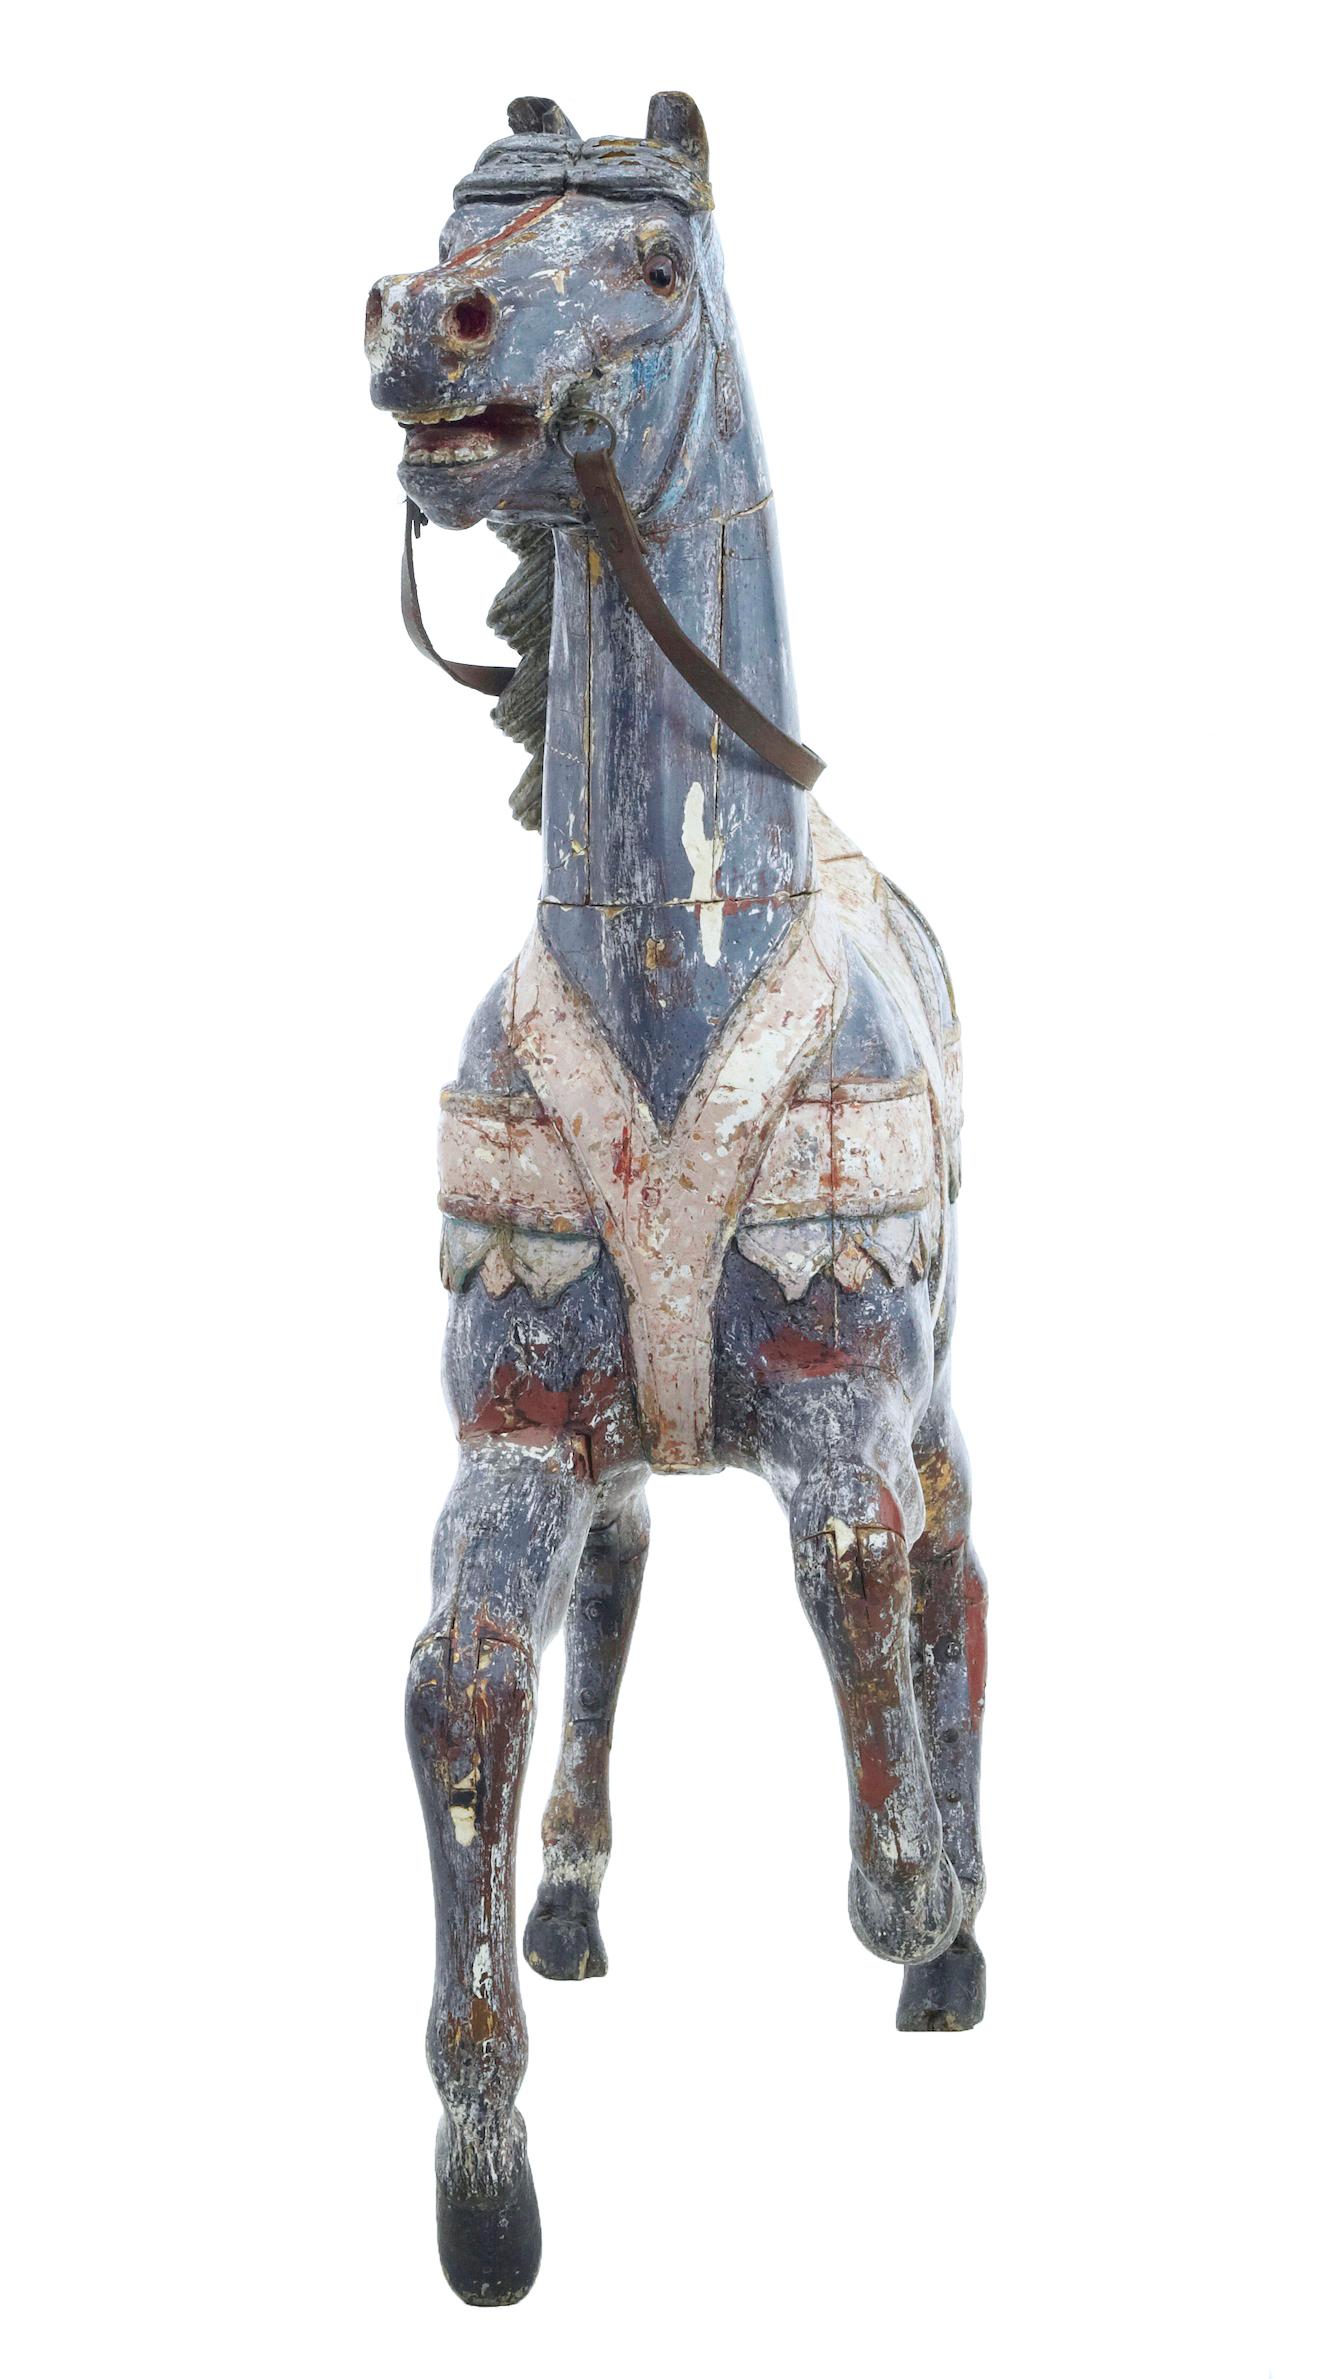 Early 20th century continental decorative carousel horse circa 1900.

Unique continental painted merry-go-round horse circa 1900. Excellent opportunity to own this highly decorative item. Now with its original coats of decorative paint dry stripped